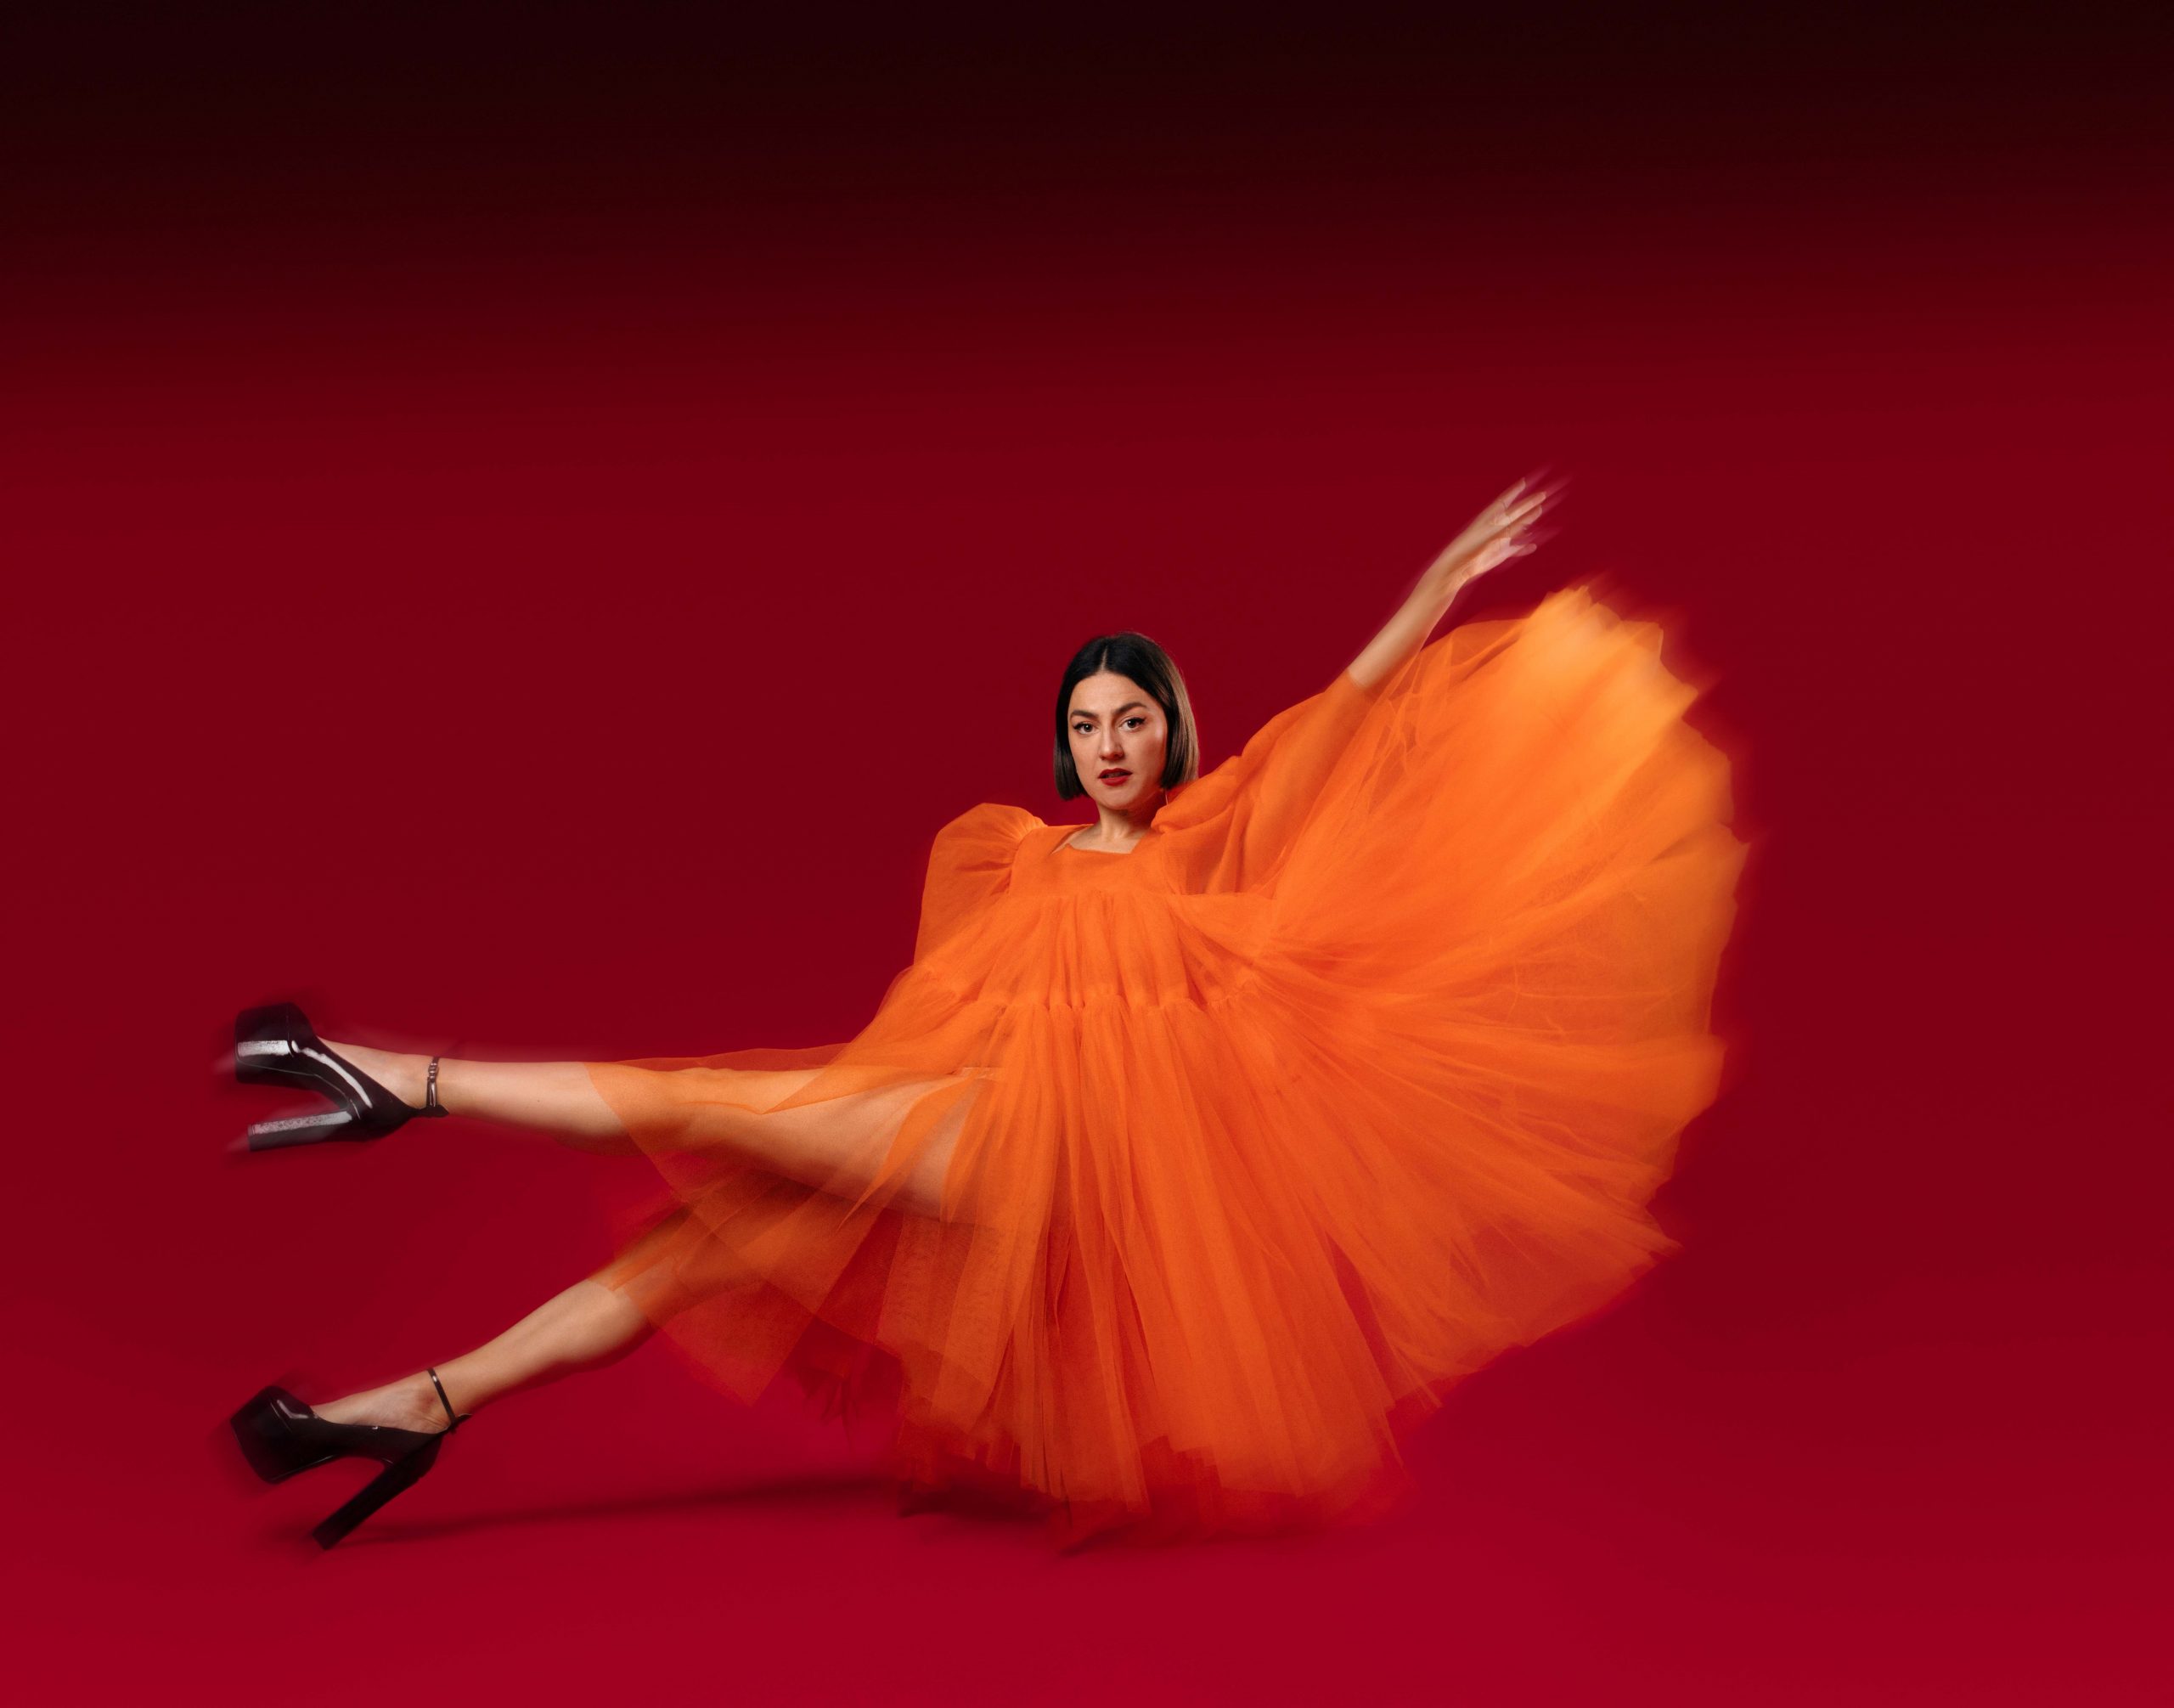 Tamsyn Kelly wears a huge orange tulle dress that fans out around her dramatically.